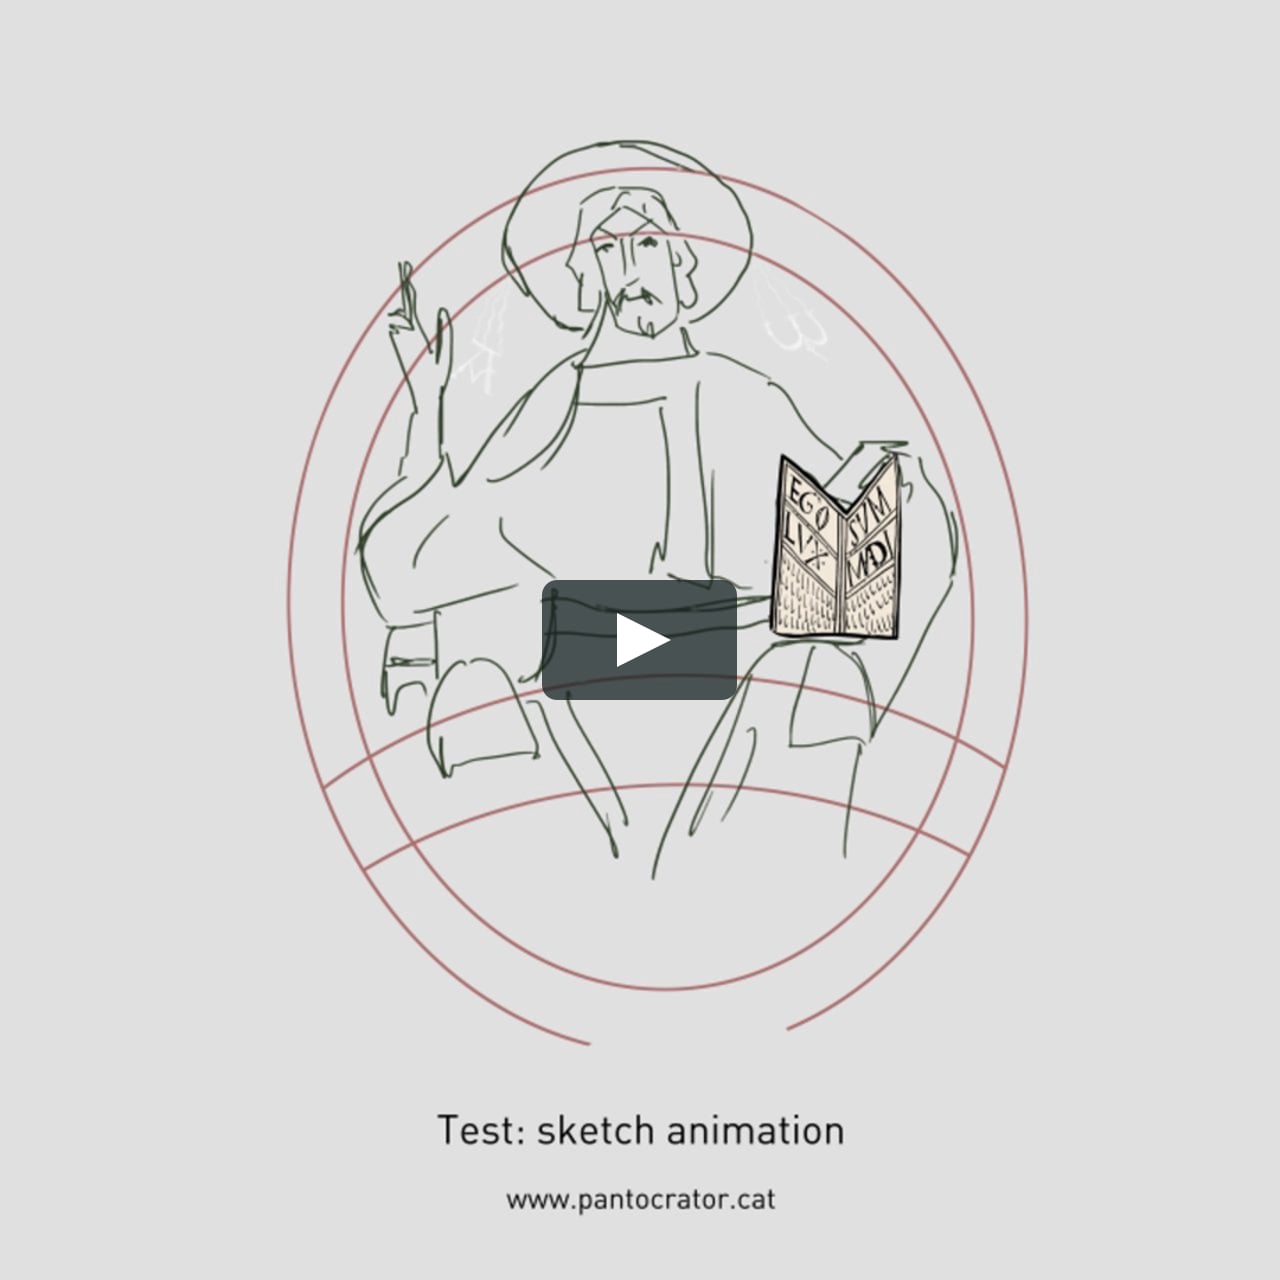 Test: sketch animation - Mapping Sant Climent de Taüll on Vimeo